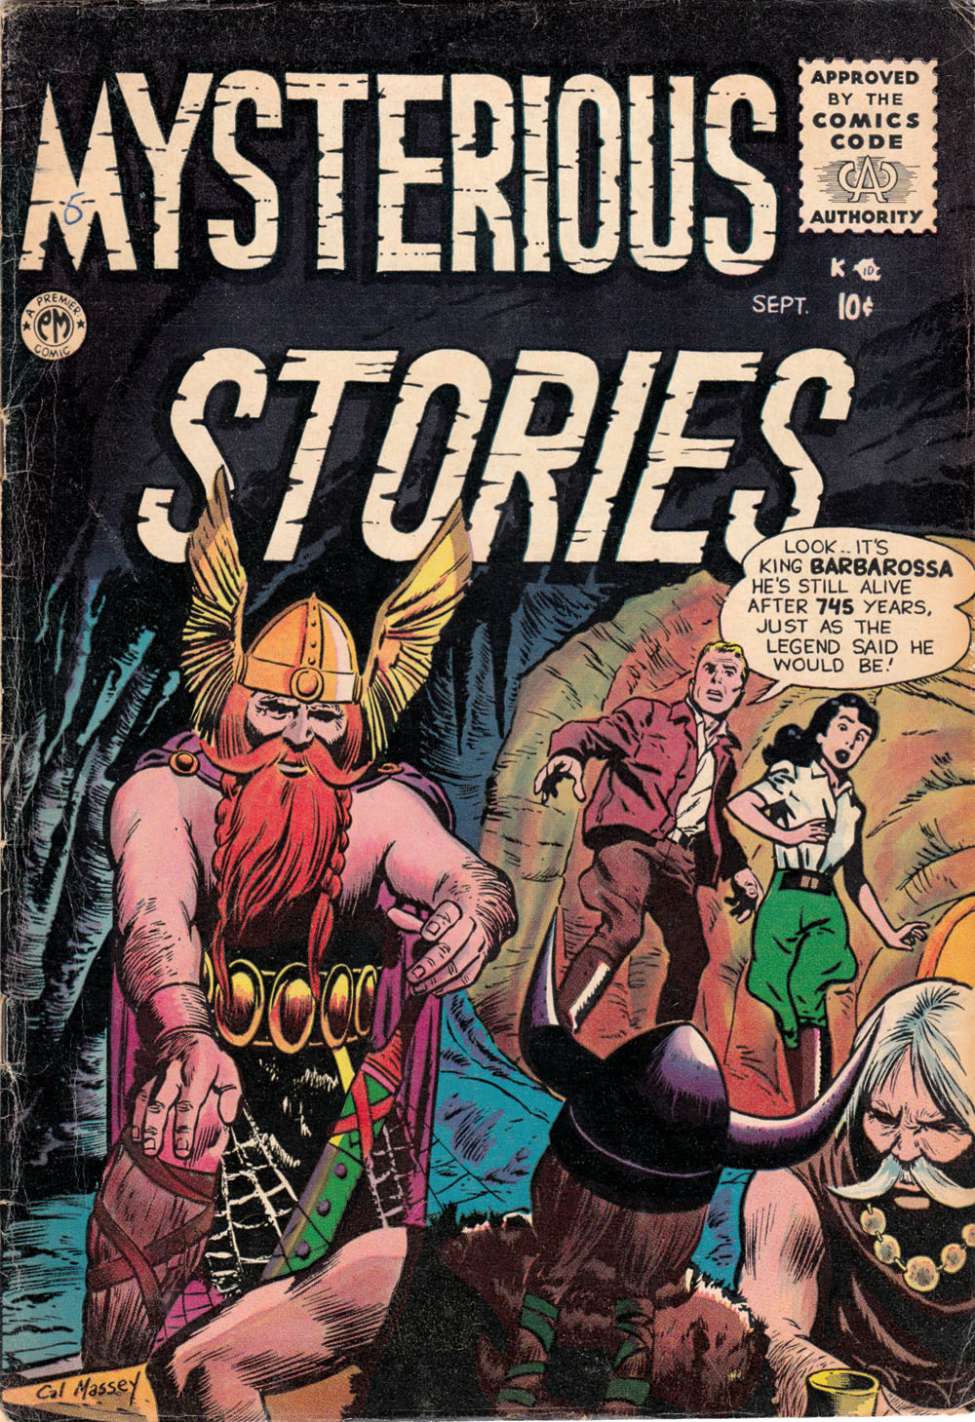 Book Cover For Mysterious Stories 5